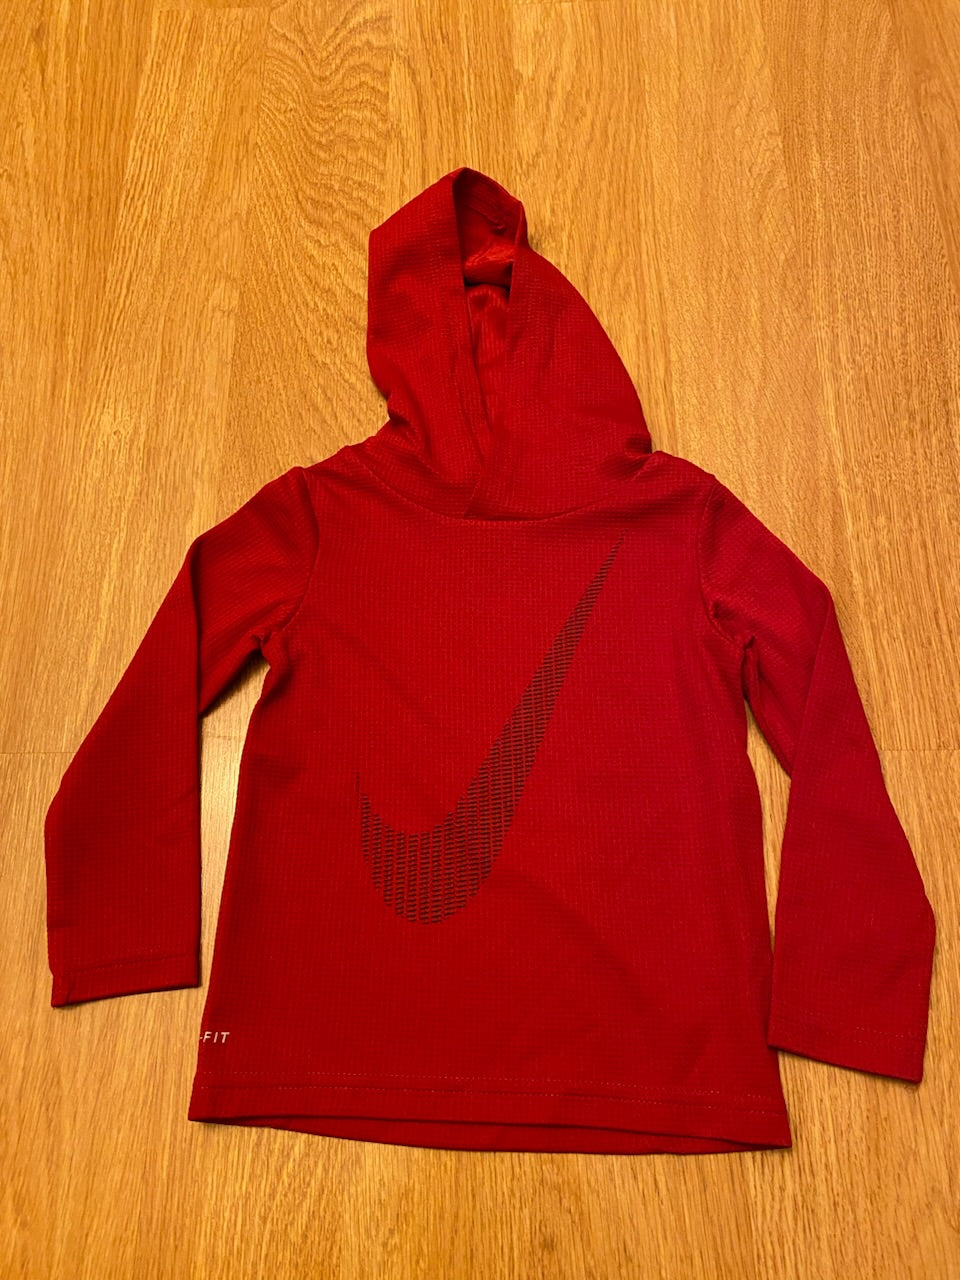 Nike Red Thermal Hooded Shirt Size  2T